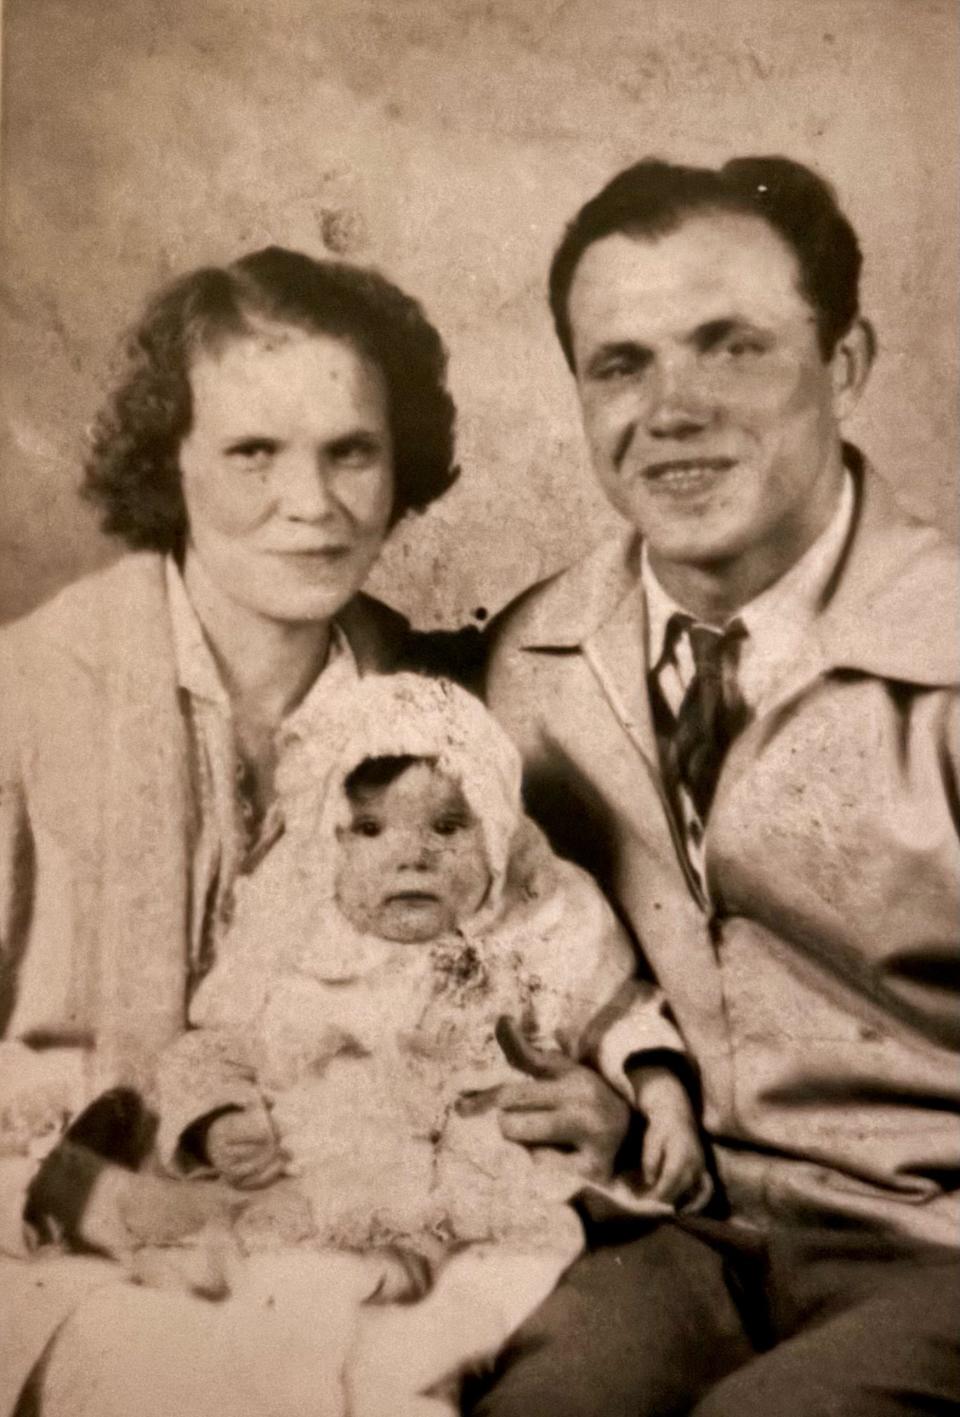 A family photo shows Michalene Saunier as a baby with her parents, Anna and Mickey Fedor. She was born on Feb. 29, 1940 - leap day - and celebrates her 21st birthday on Feb. 29, 2024.